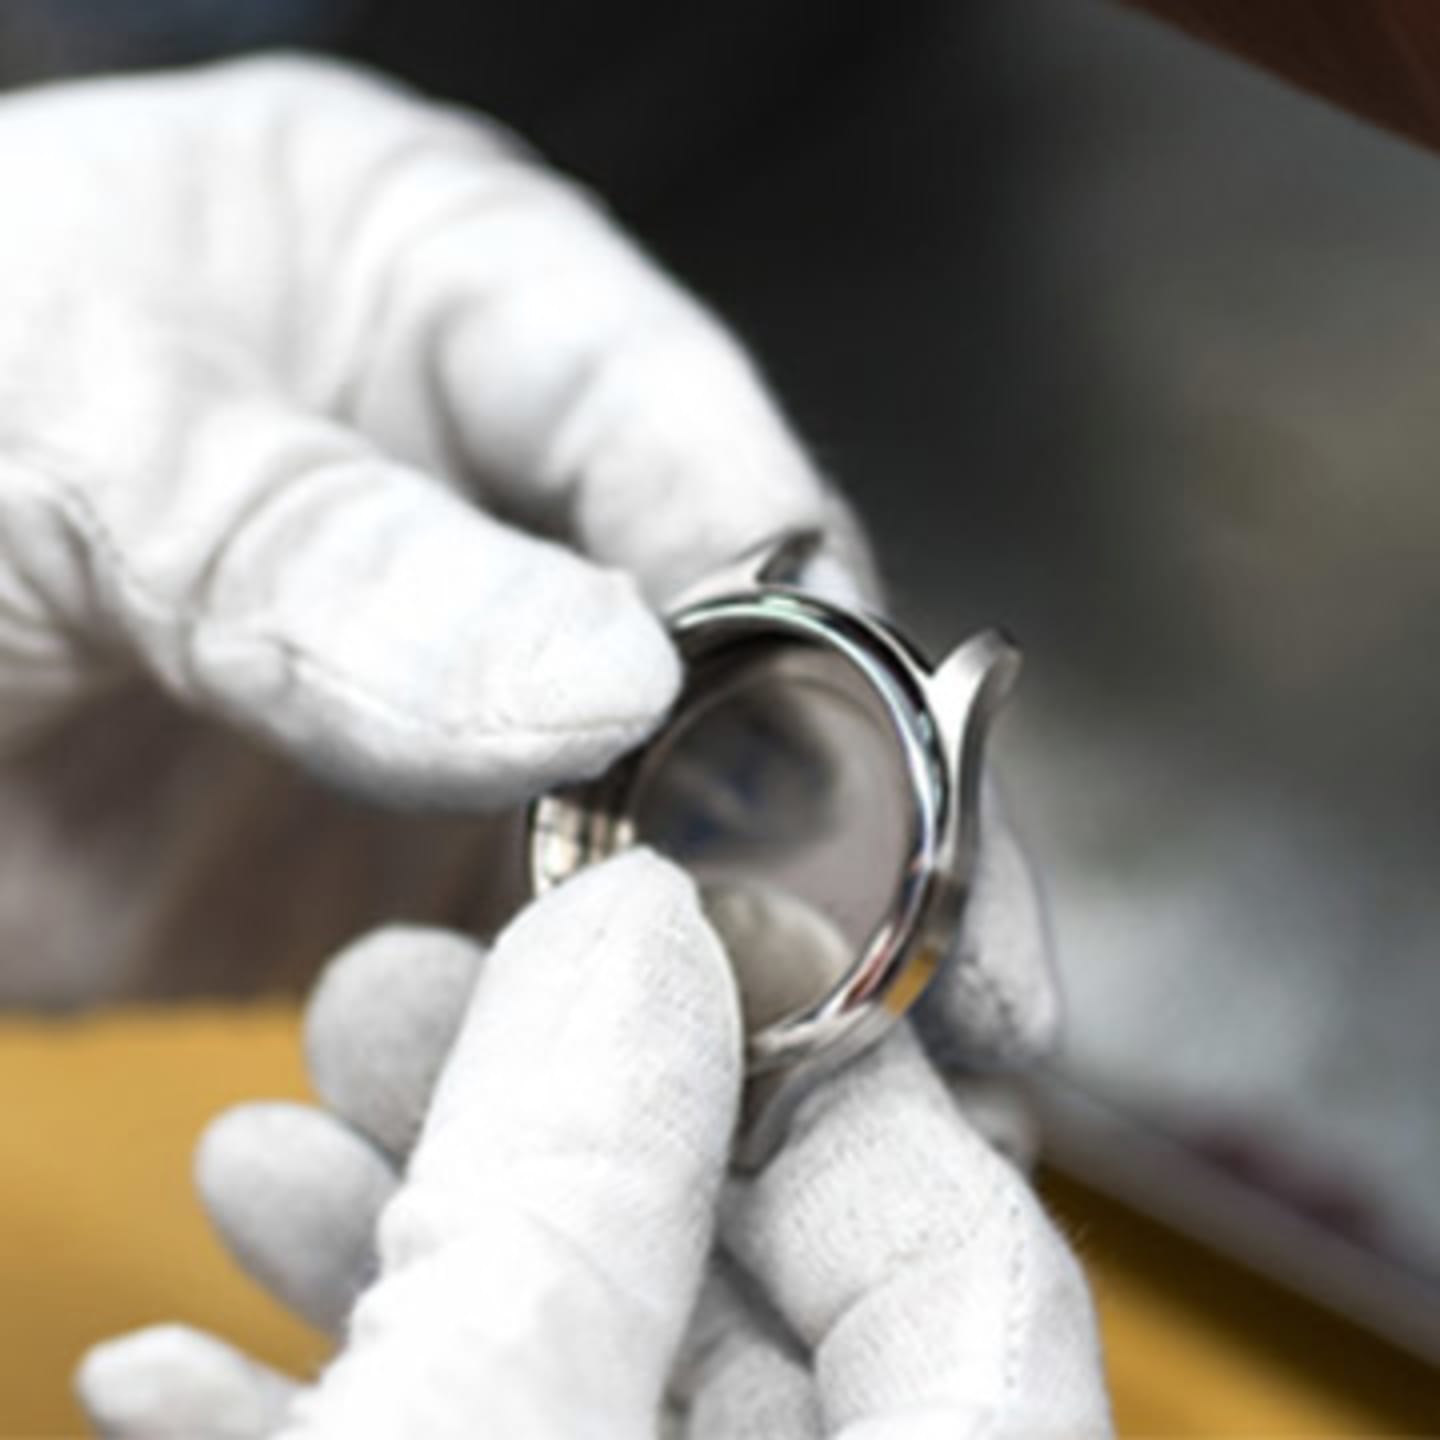 Watch maker with white gloves holding a silver watch body in their hands